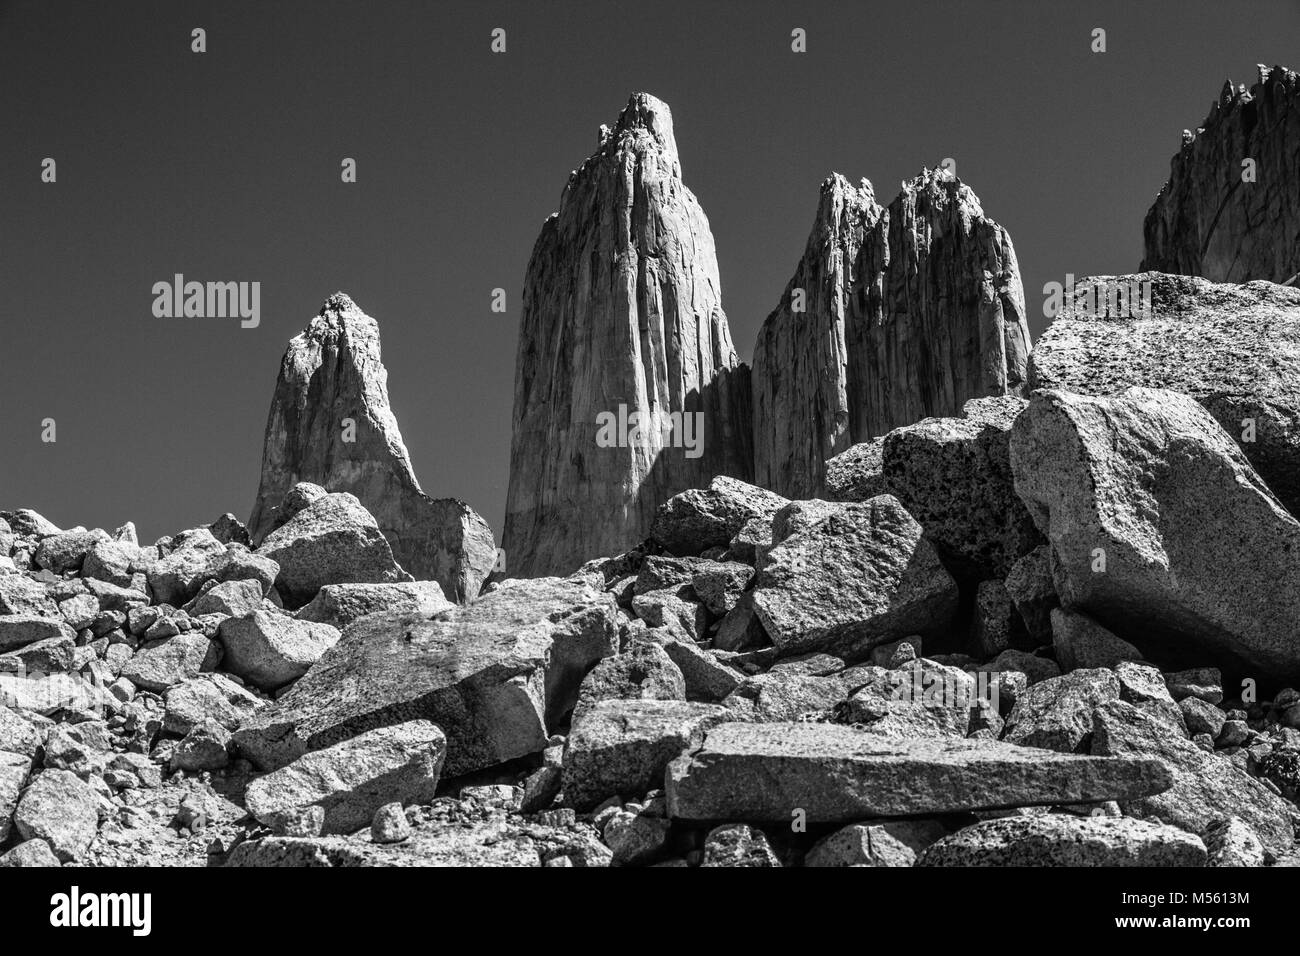 A black and white photo of the famous three granite towers of Torres del Paine National Park, the view at the end of the w walk. Stock Photo